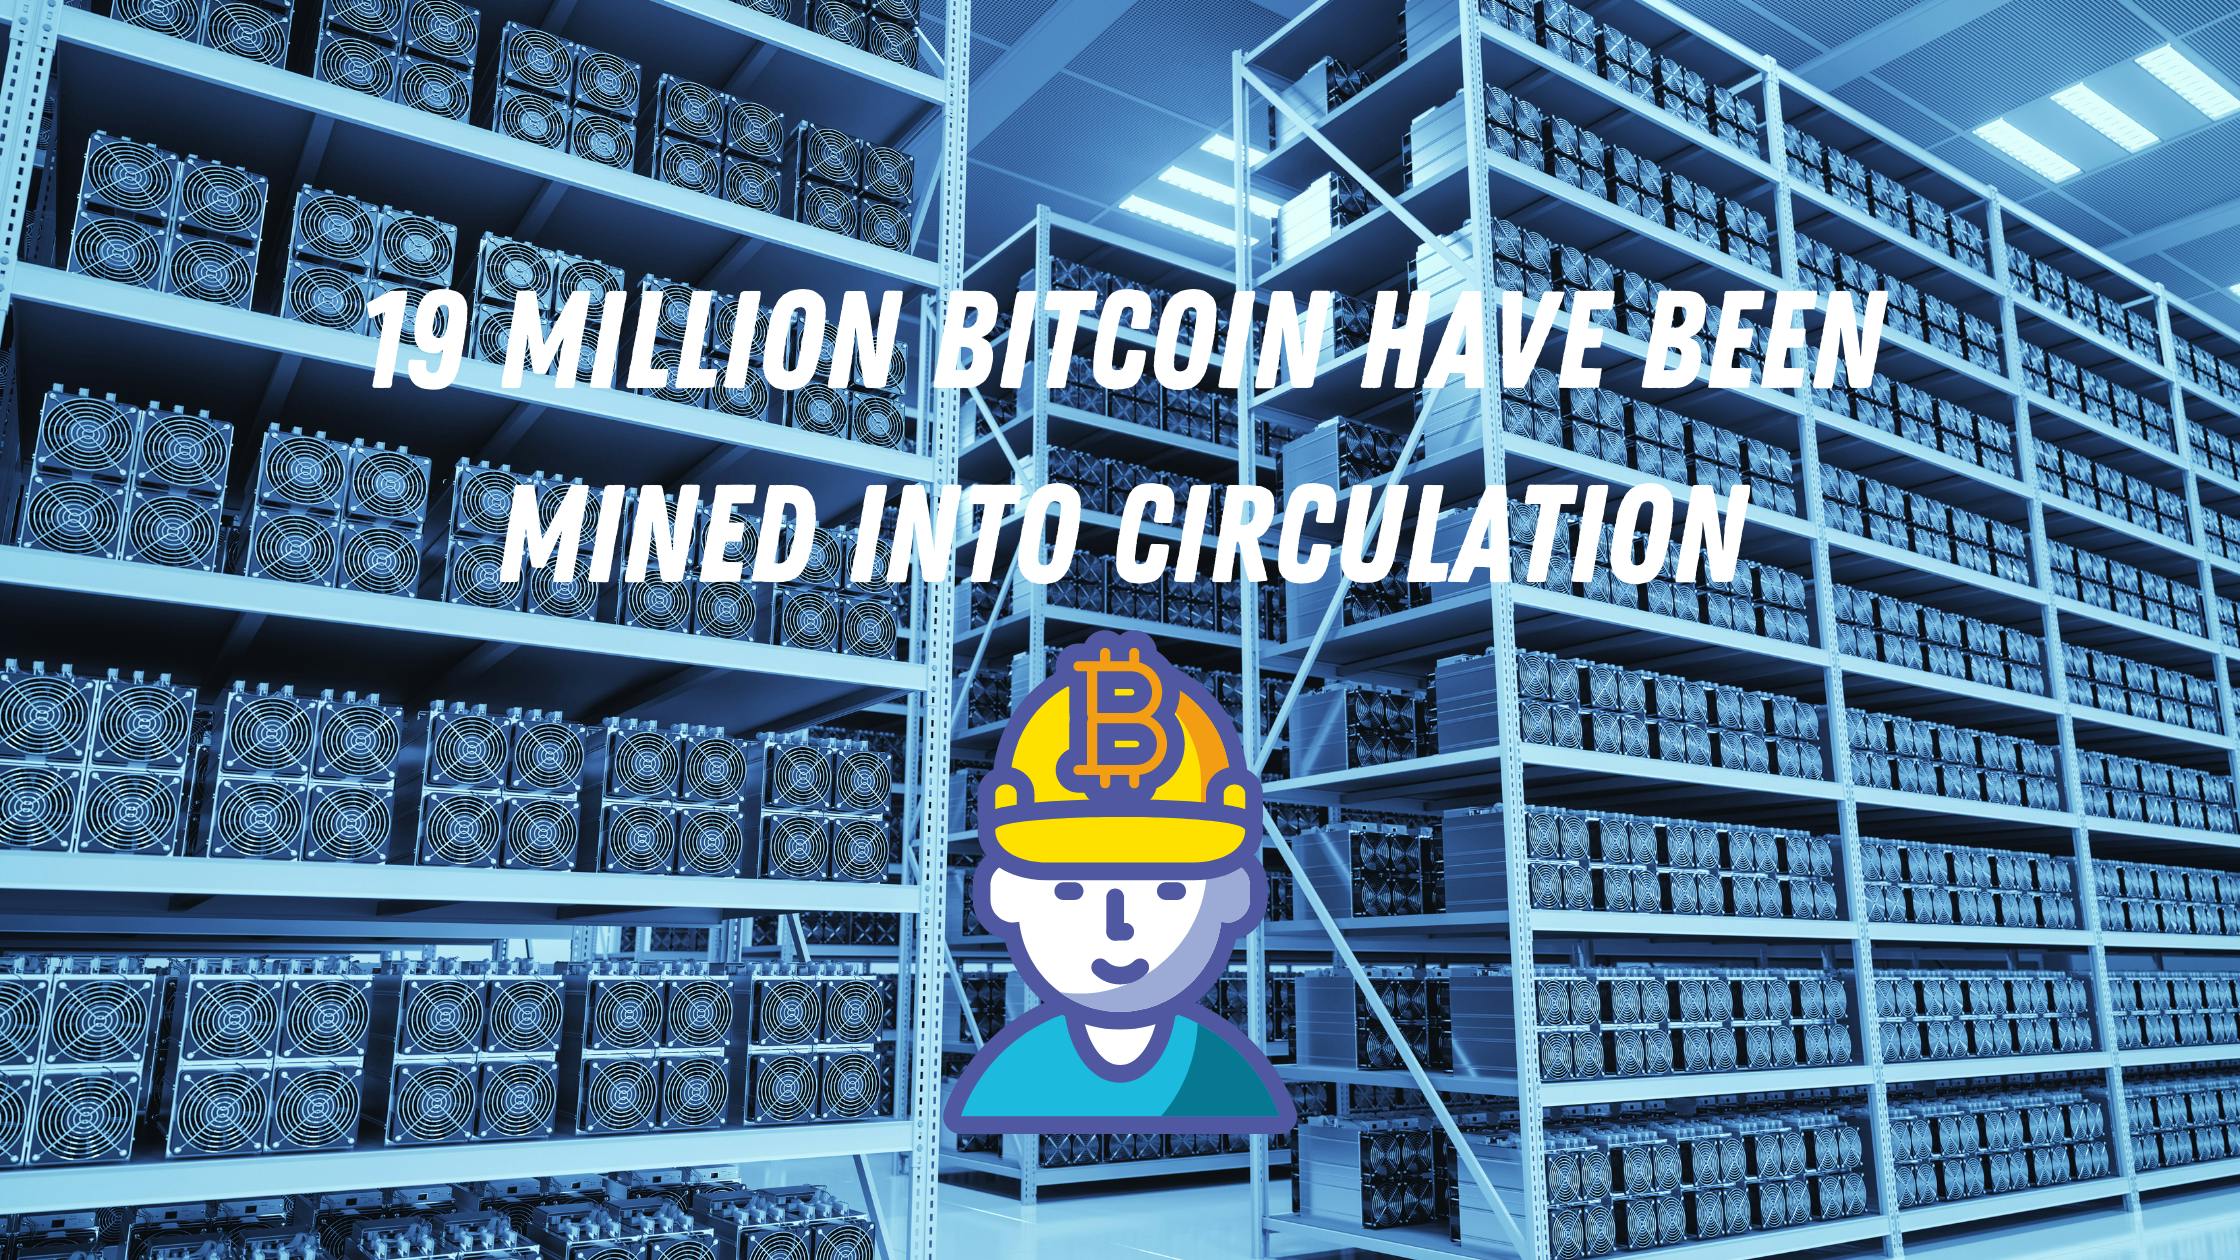 19 Million Bitcoin Have Been Mined Into Circulation, 2 Million Left to Be Found